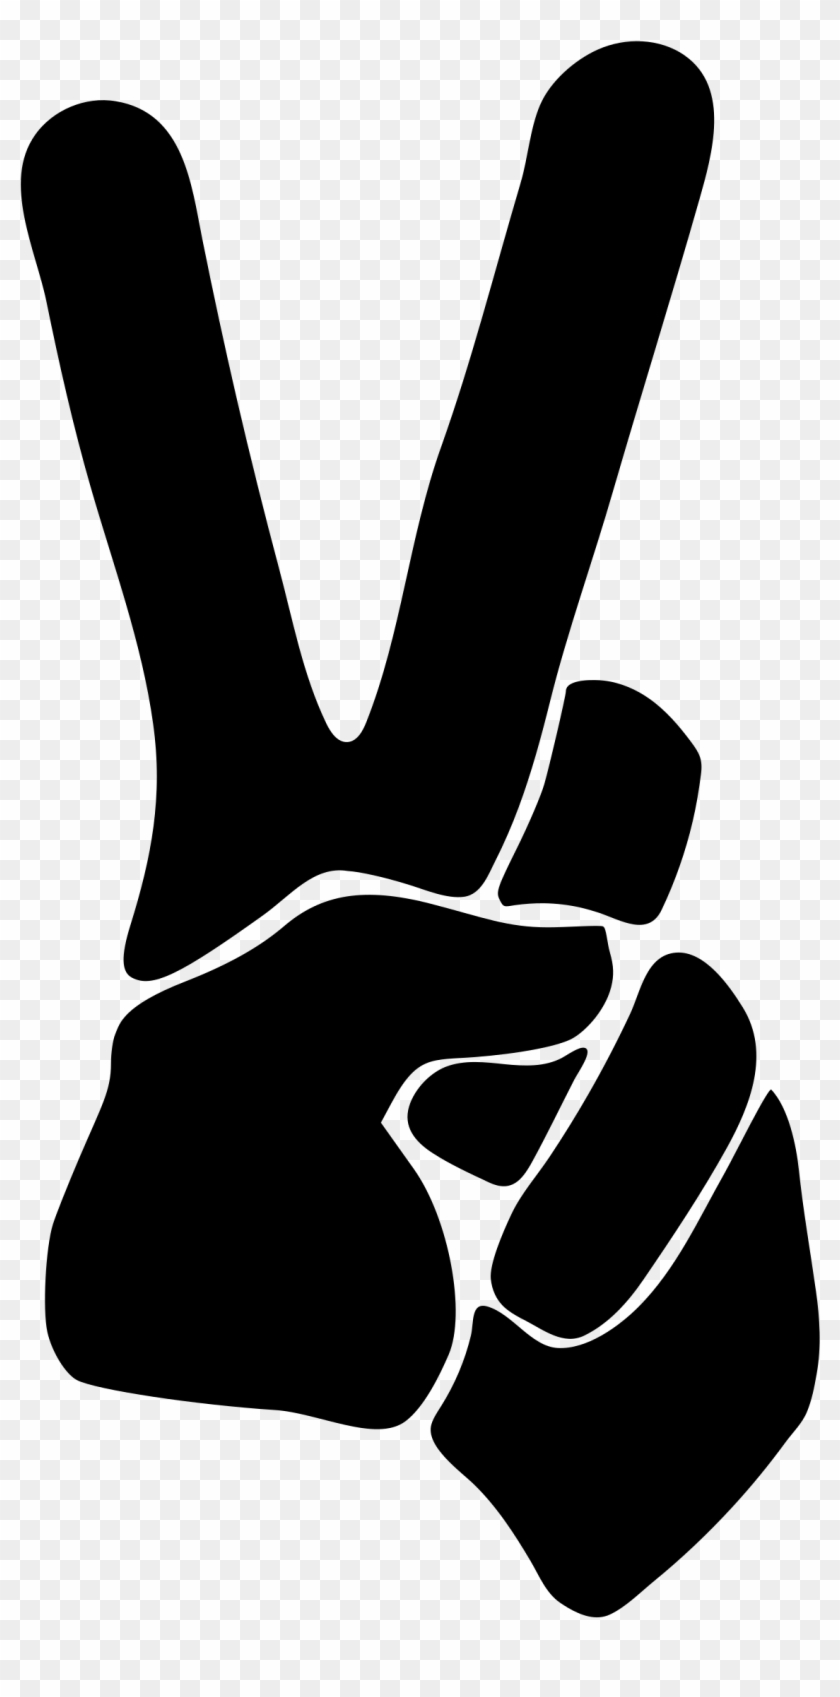 Peace Sign At Getdrawings - Peace Hand Sign Png Clipart